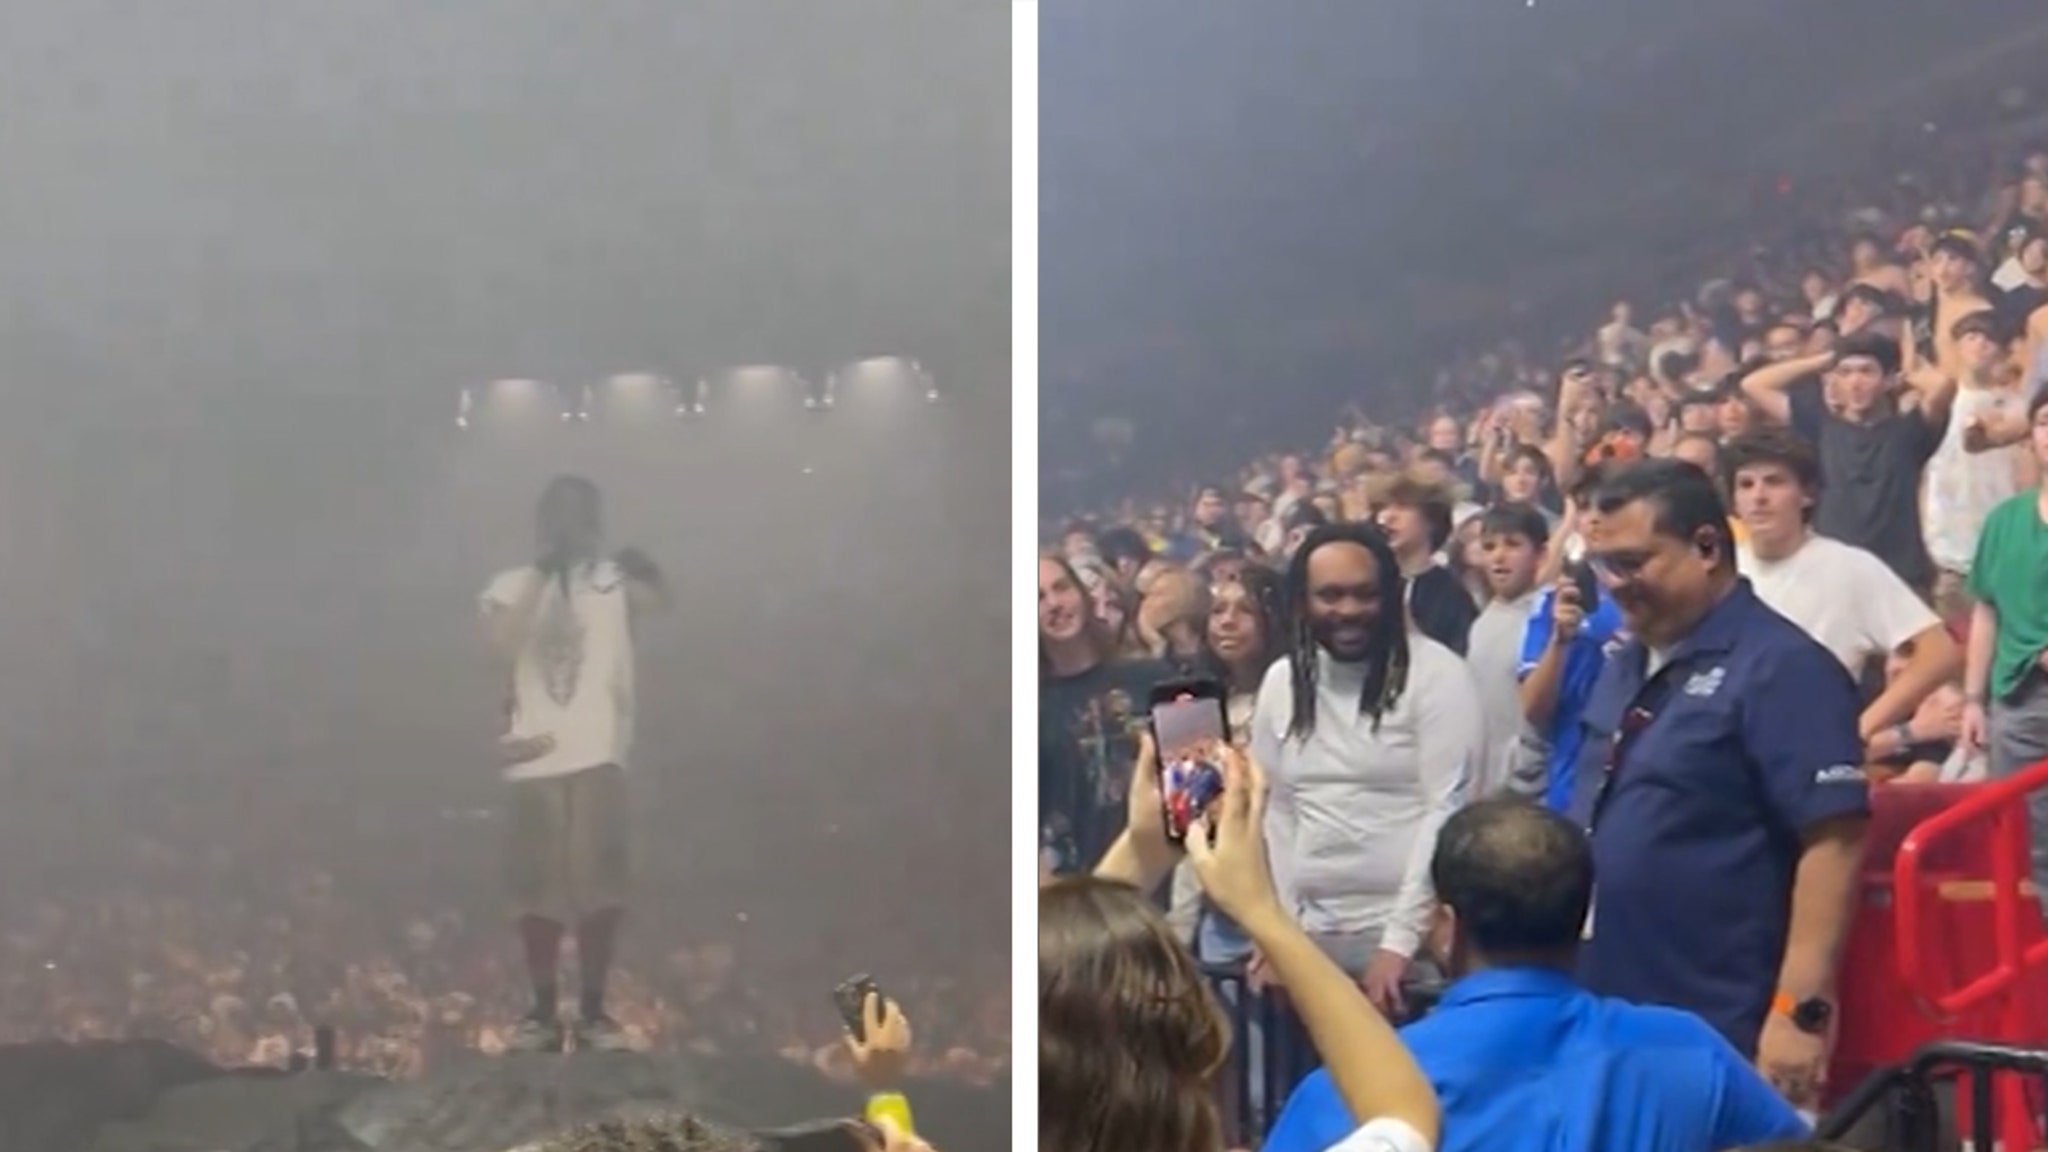 Travis Scott Gives Janitor ,000 to Take Night Off and Enjoy Concert